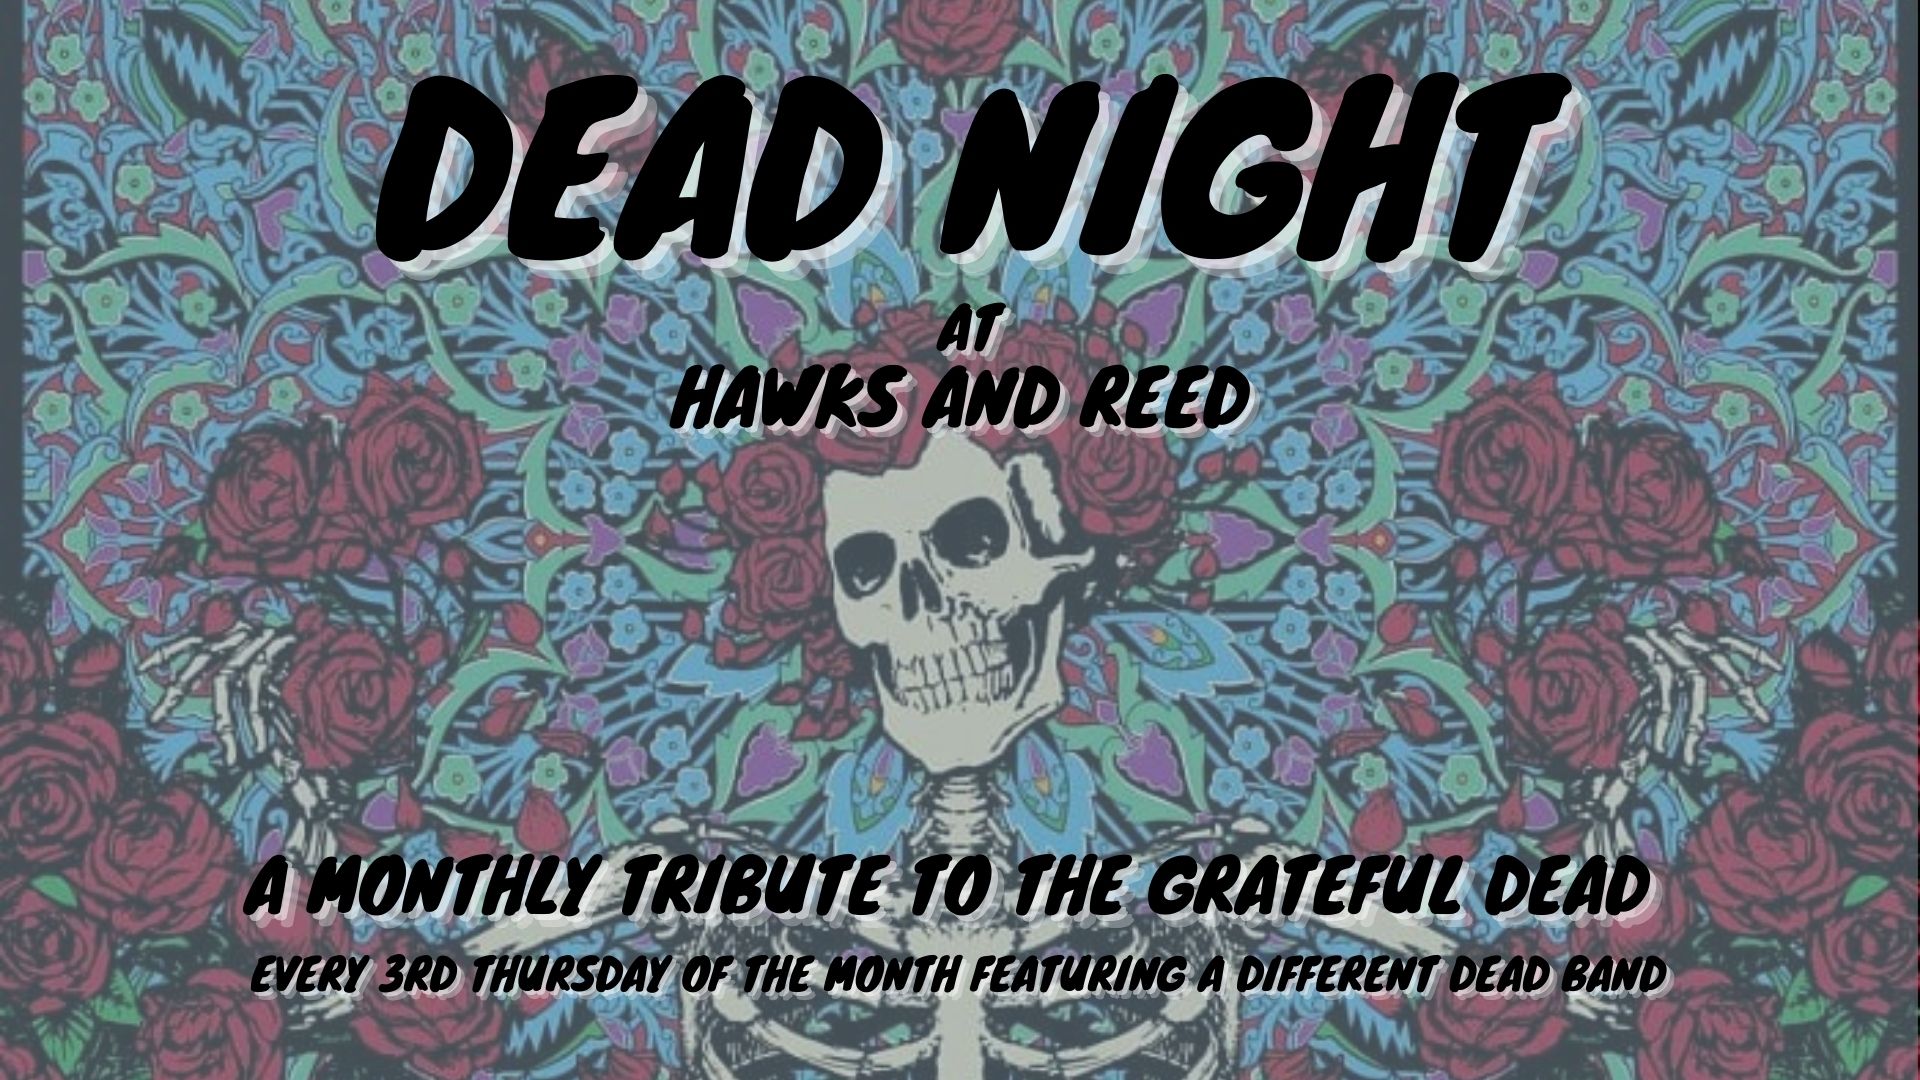 DEAD NIGHT AT HAWKS AND REED – WOLFMAN JACK